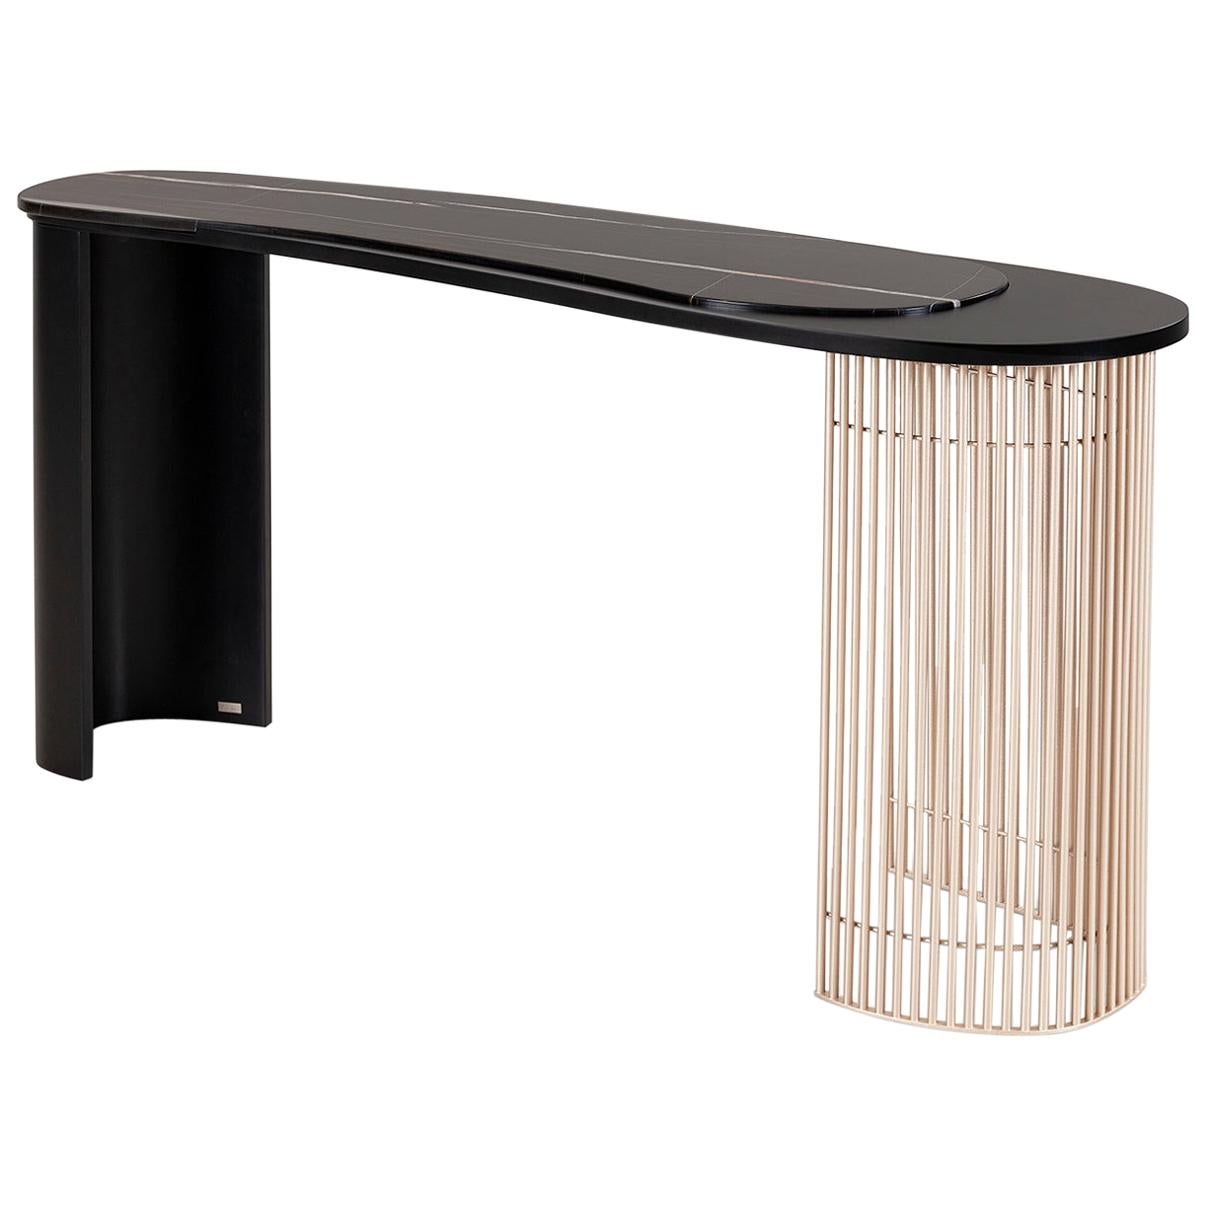 21st Century Art Deco Castelo Console Handcrafted Portugal by Greenapple